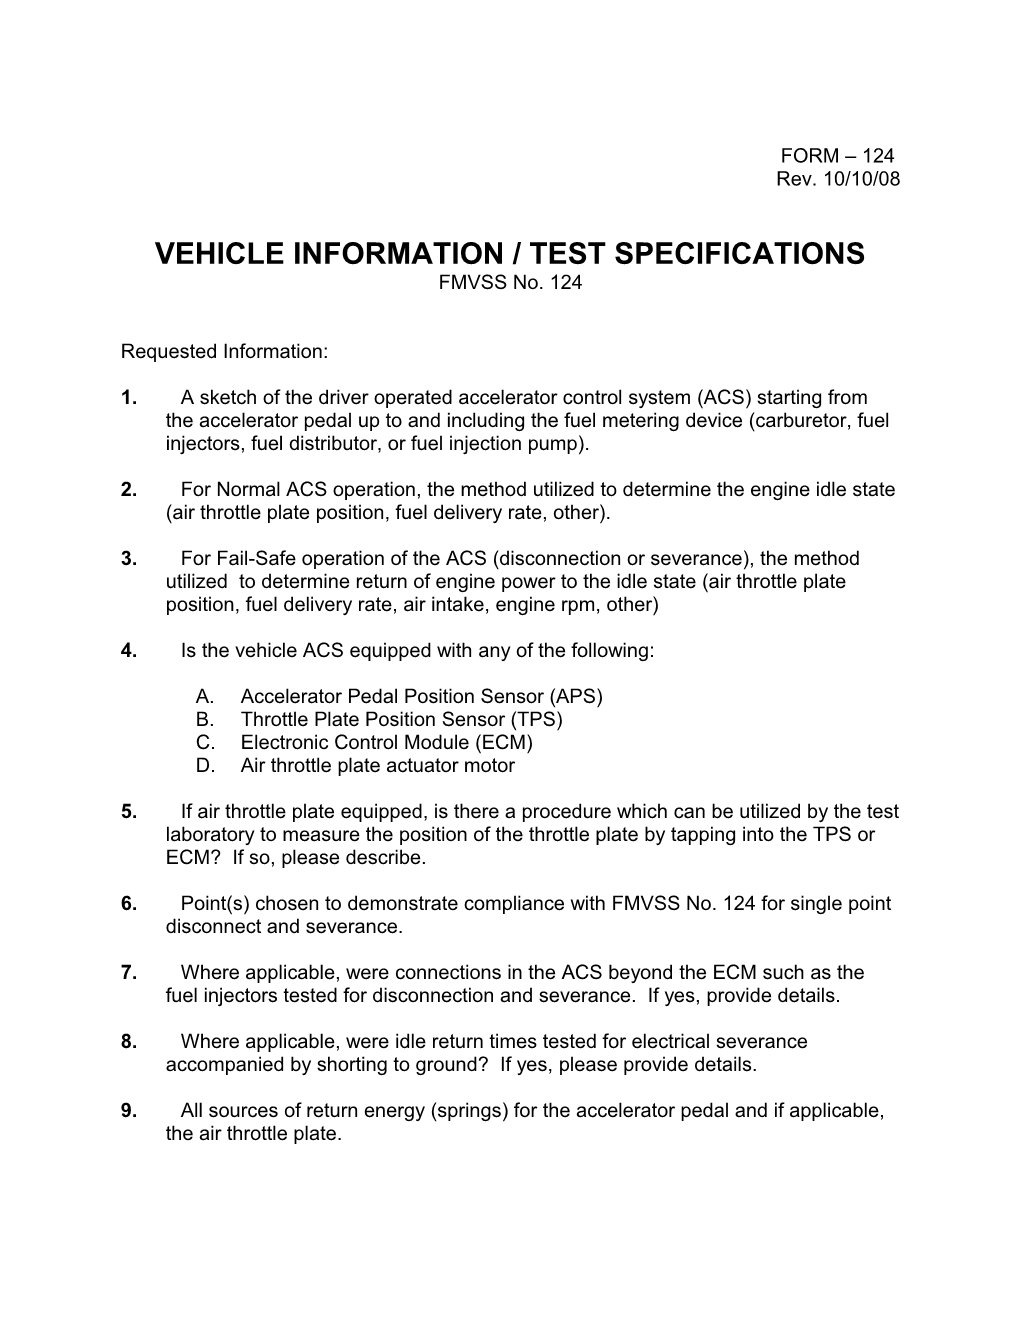 Vehicle Information/Test Specifications